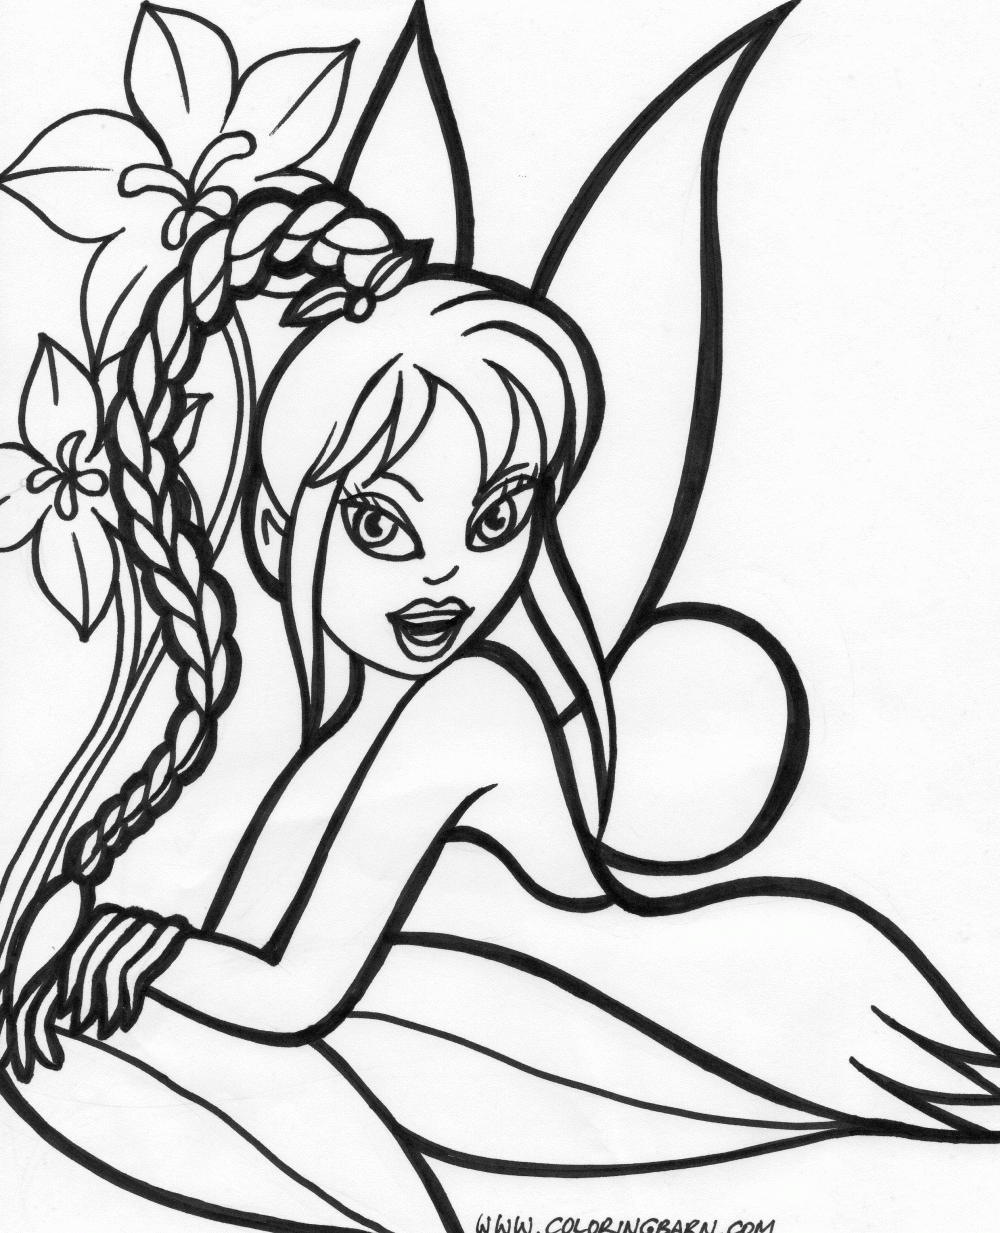 Fairy Coloring Pages Free Printable | Free Coloring Pages